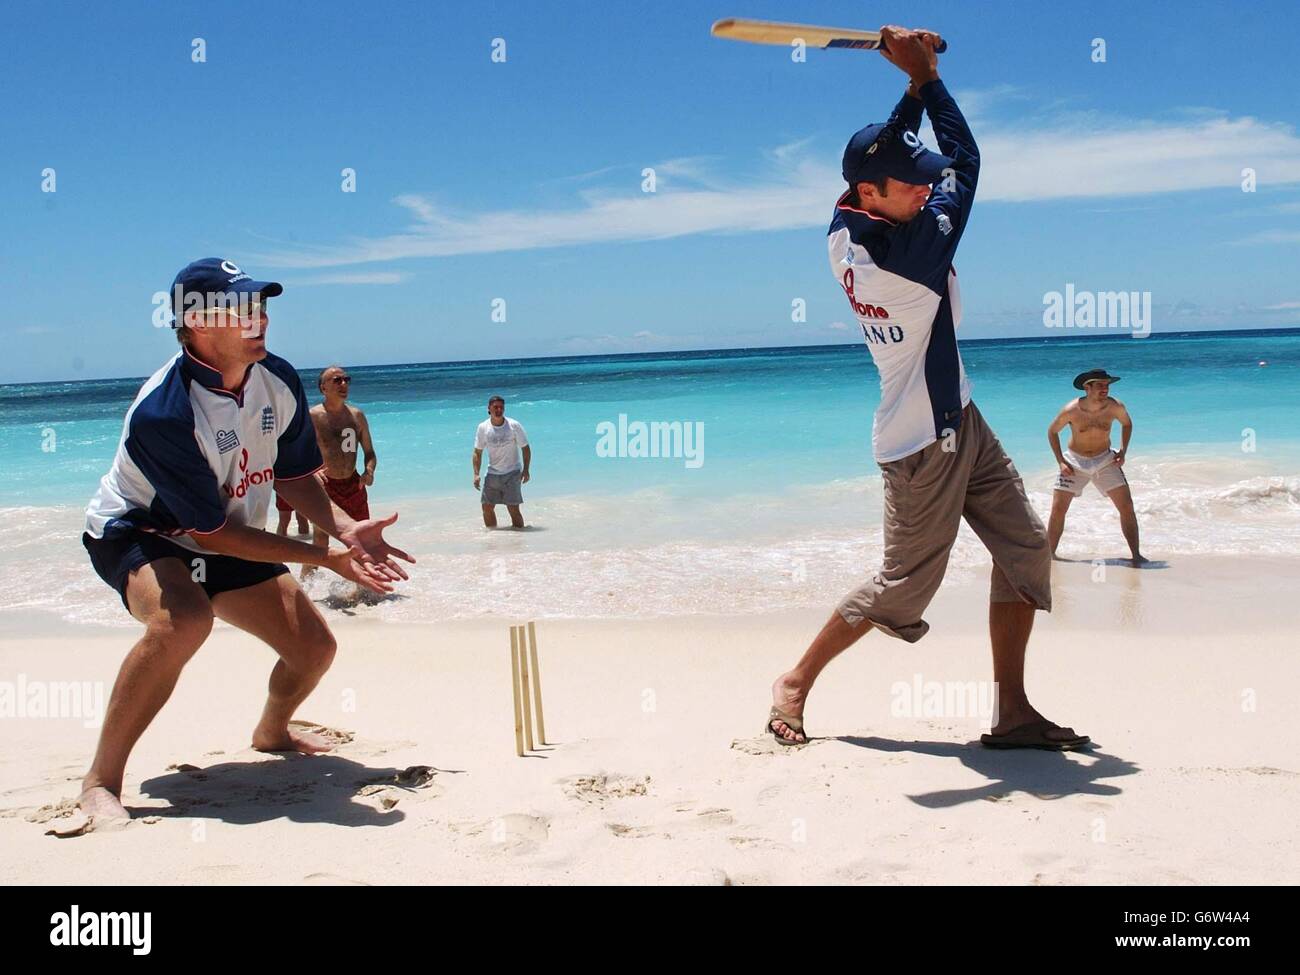 England captain Michael Vaughan and Matthew Hoggard (left) play beach cricket with supporters near the team hotel, Worthing, Barbados. England yesterday won the third Test against West Indies in three days to take a 3-0 lead in the four match series. Stock Photo